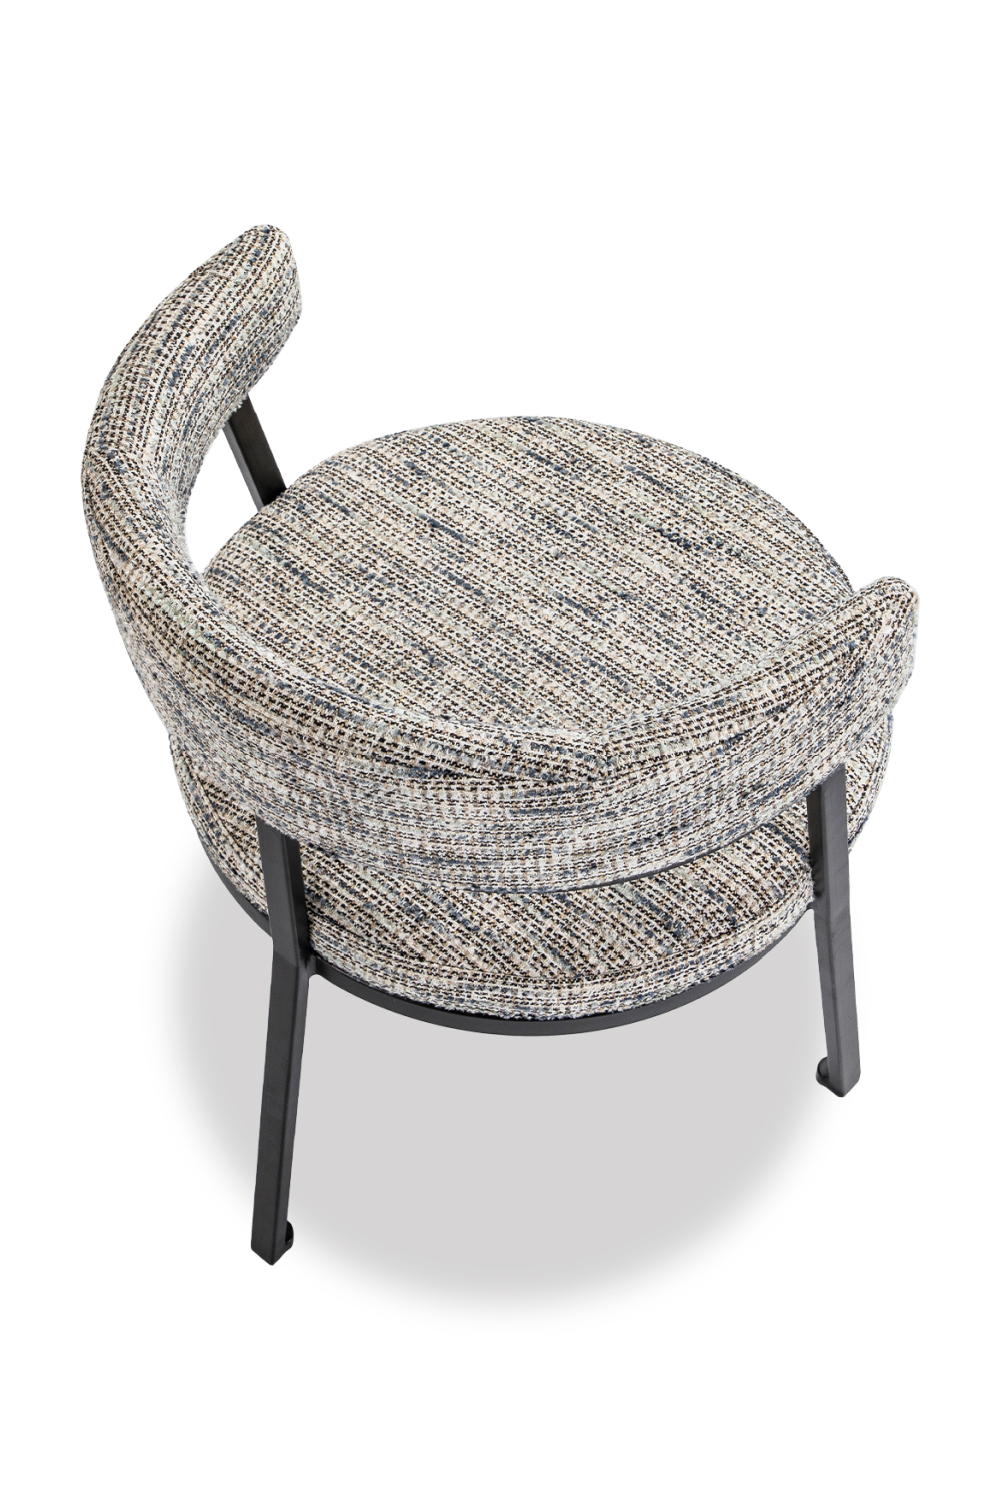 Round Seat Dining Chair | Liang & Eimil Bonnet | Oroa.com